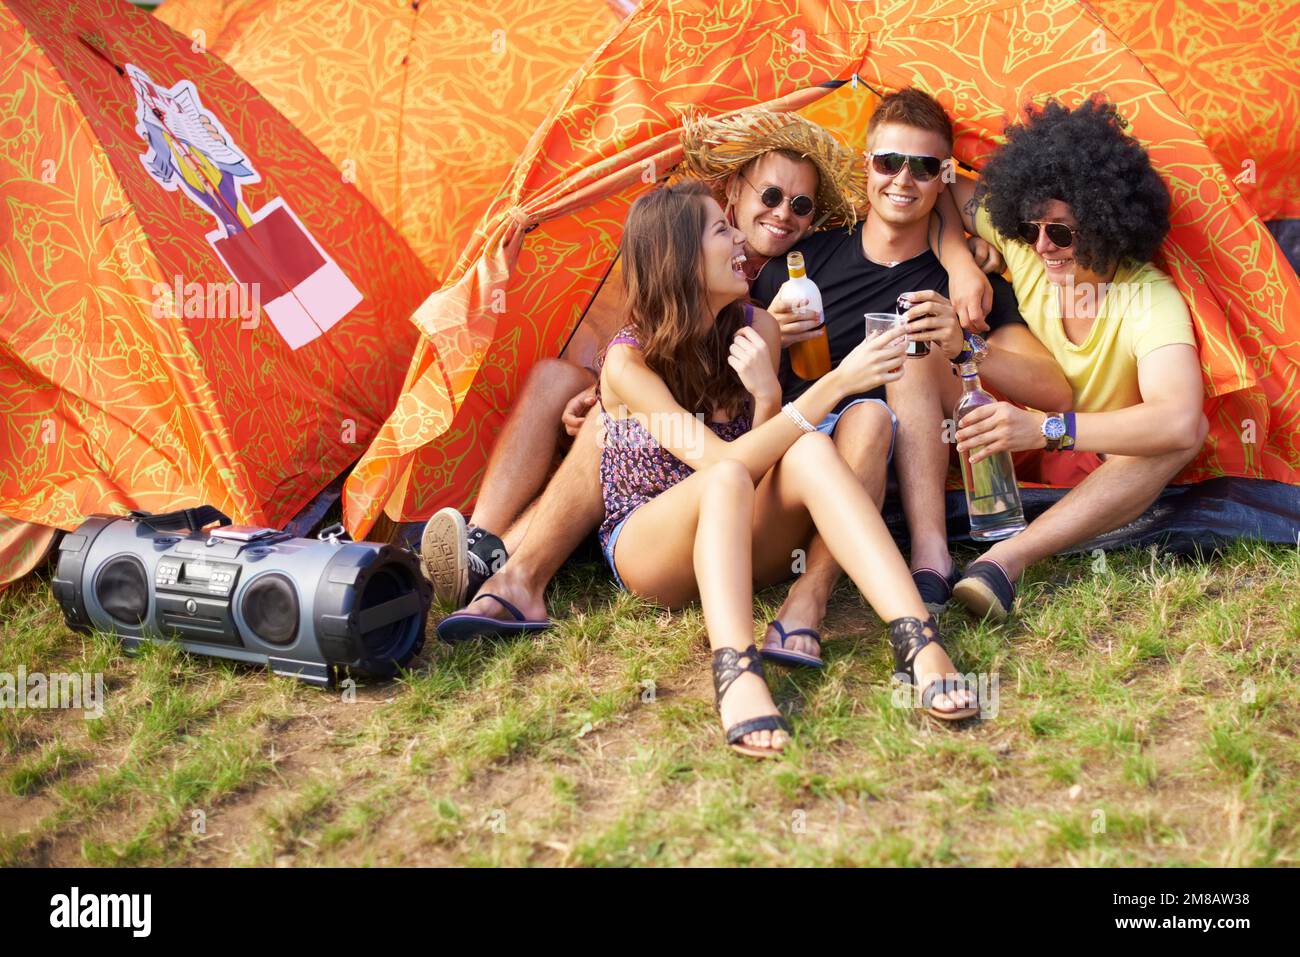 https://c8.alamy.com/comp/2M8AW38/camping-with-friends-a-group-of-friends-sitting-outside-their-tent-and-laughing-2M8AW38.jpg